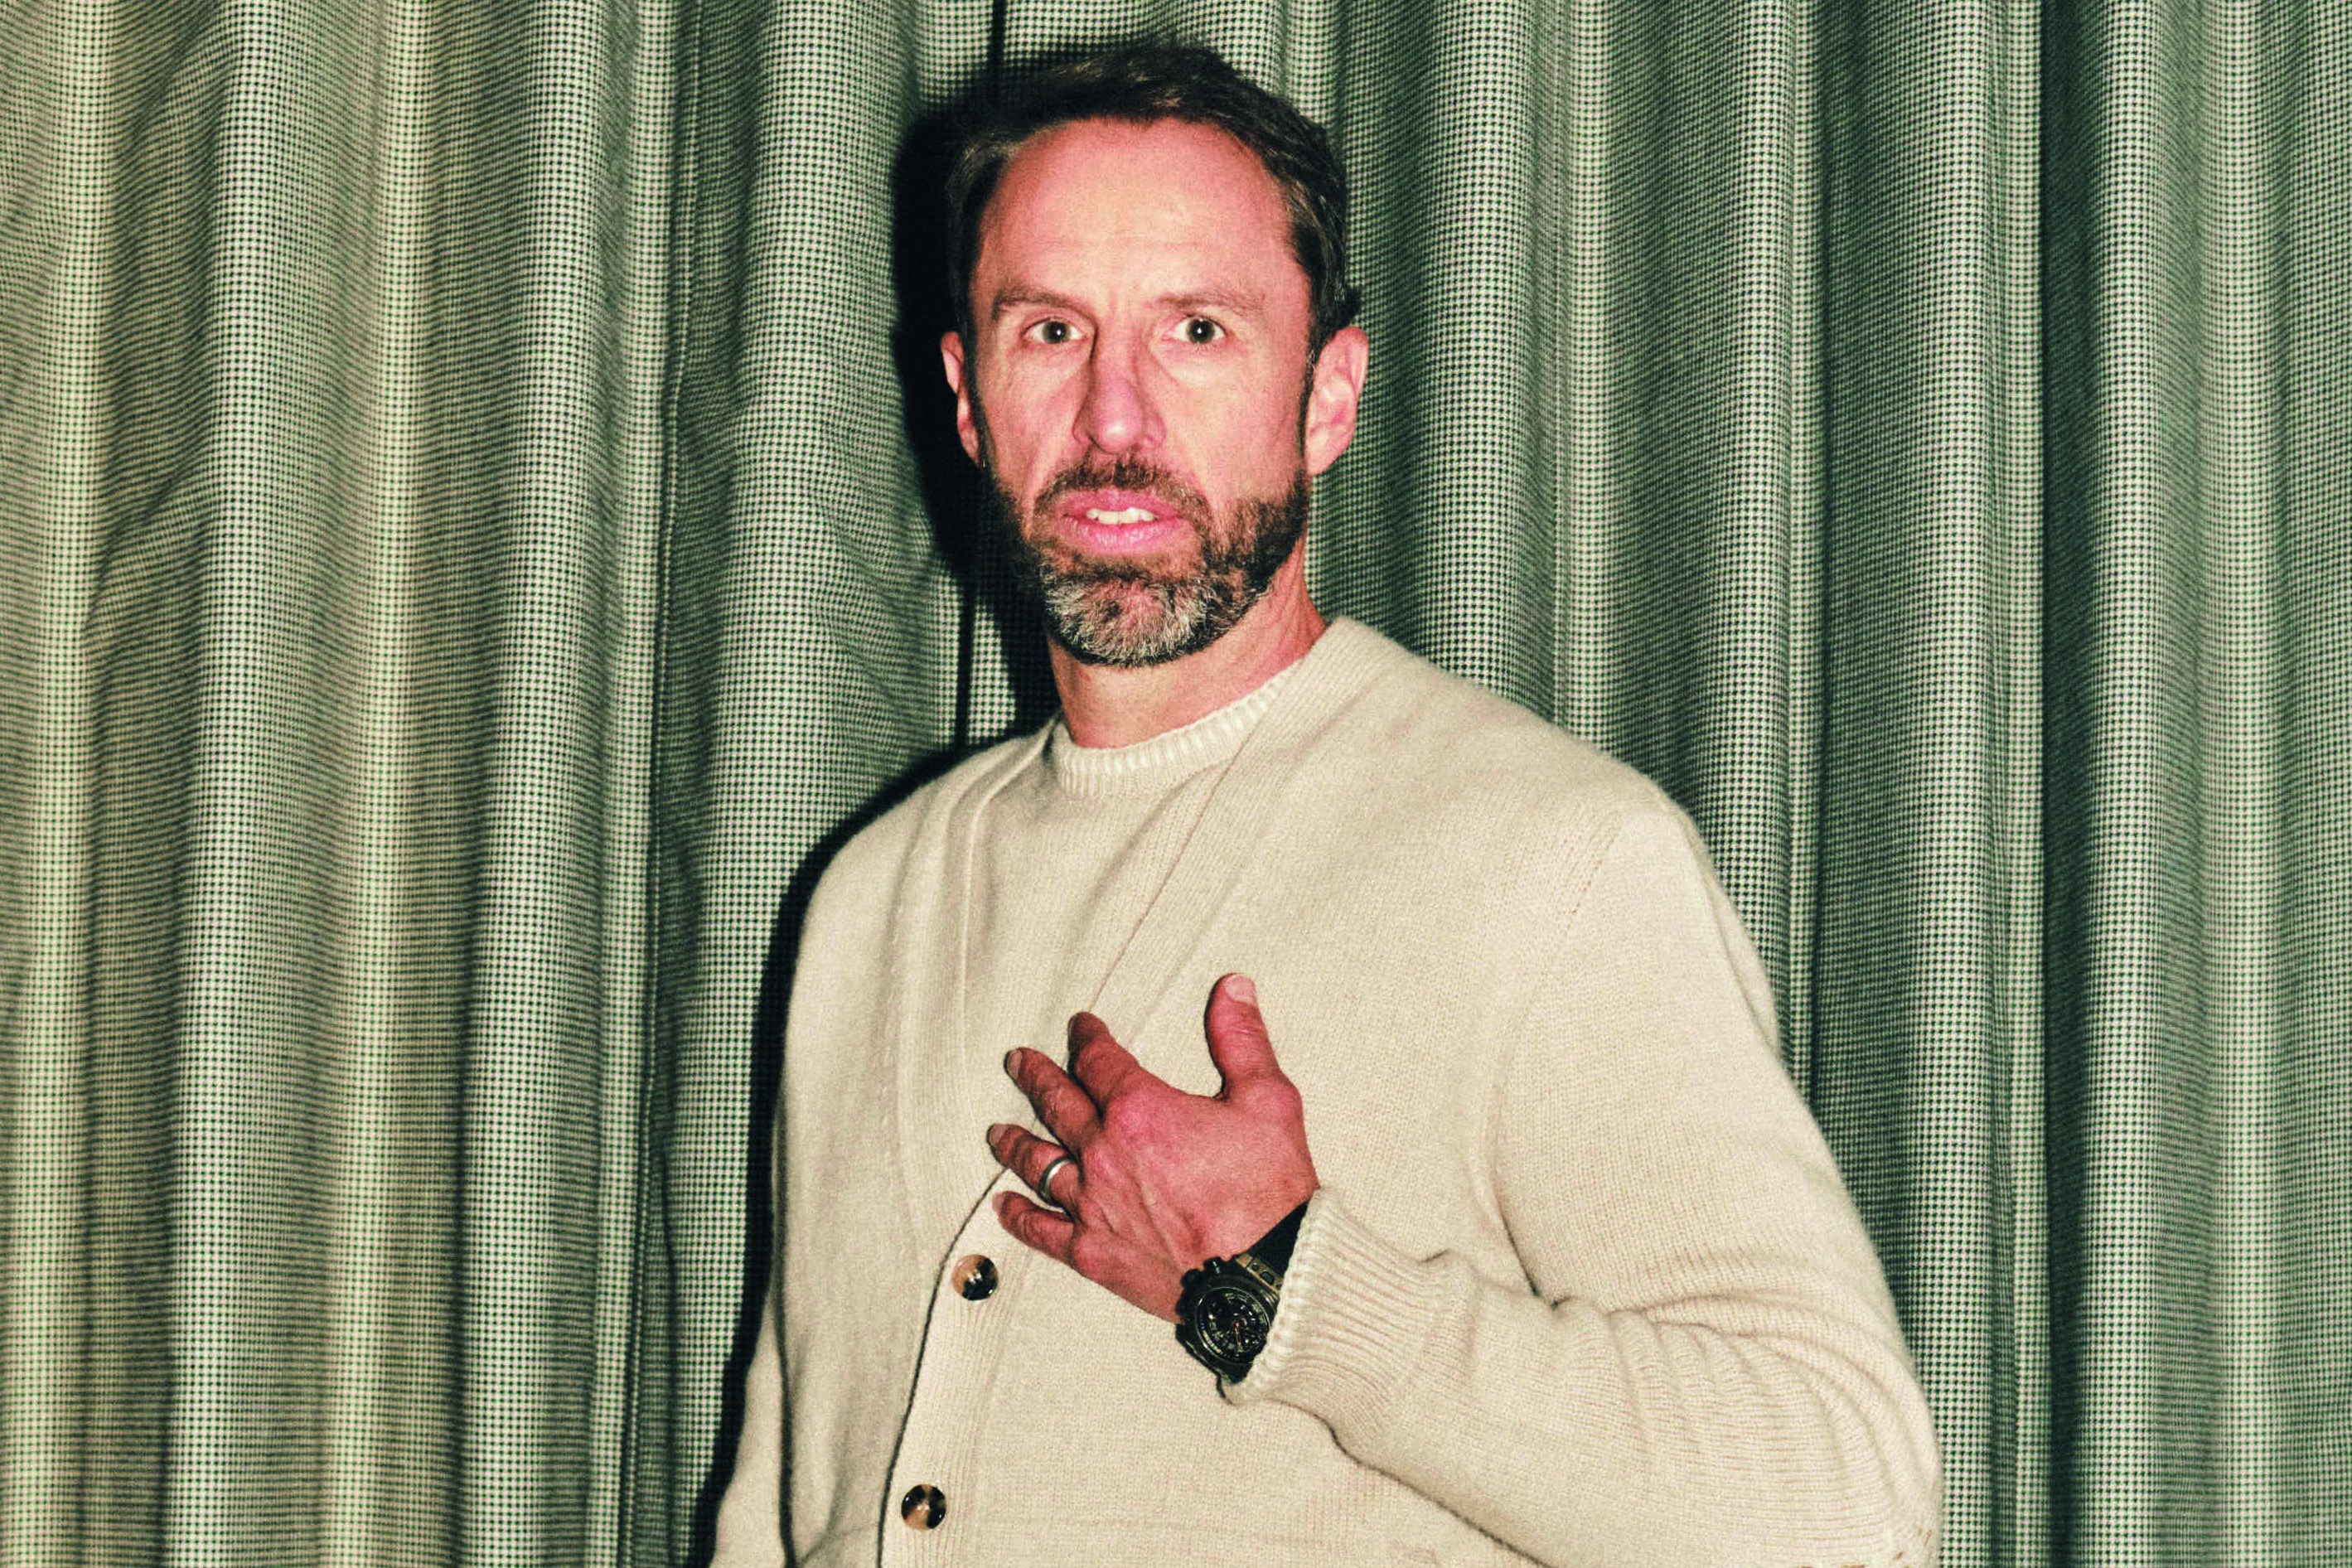 Gareth Southgate was photographed wearing a cardigan for GQ by Niall Hodson